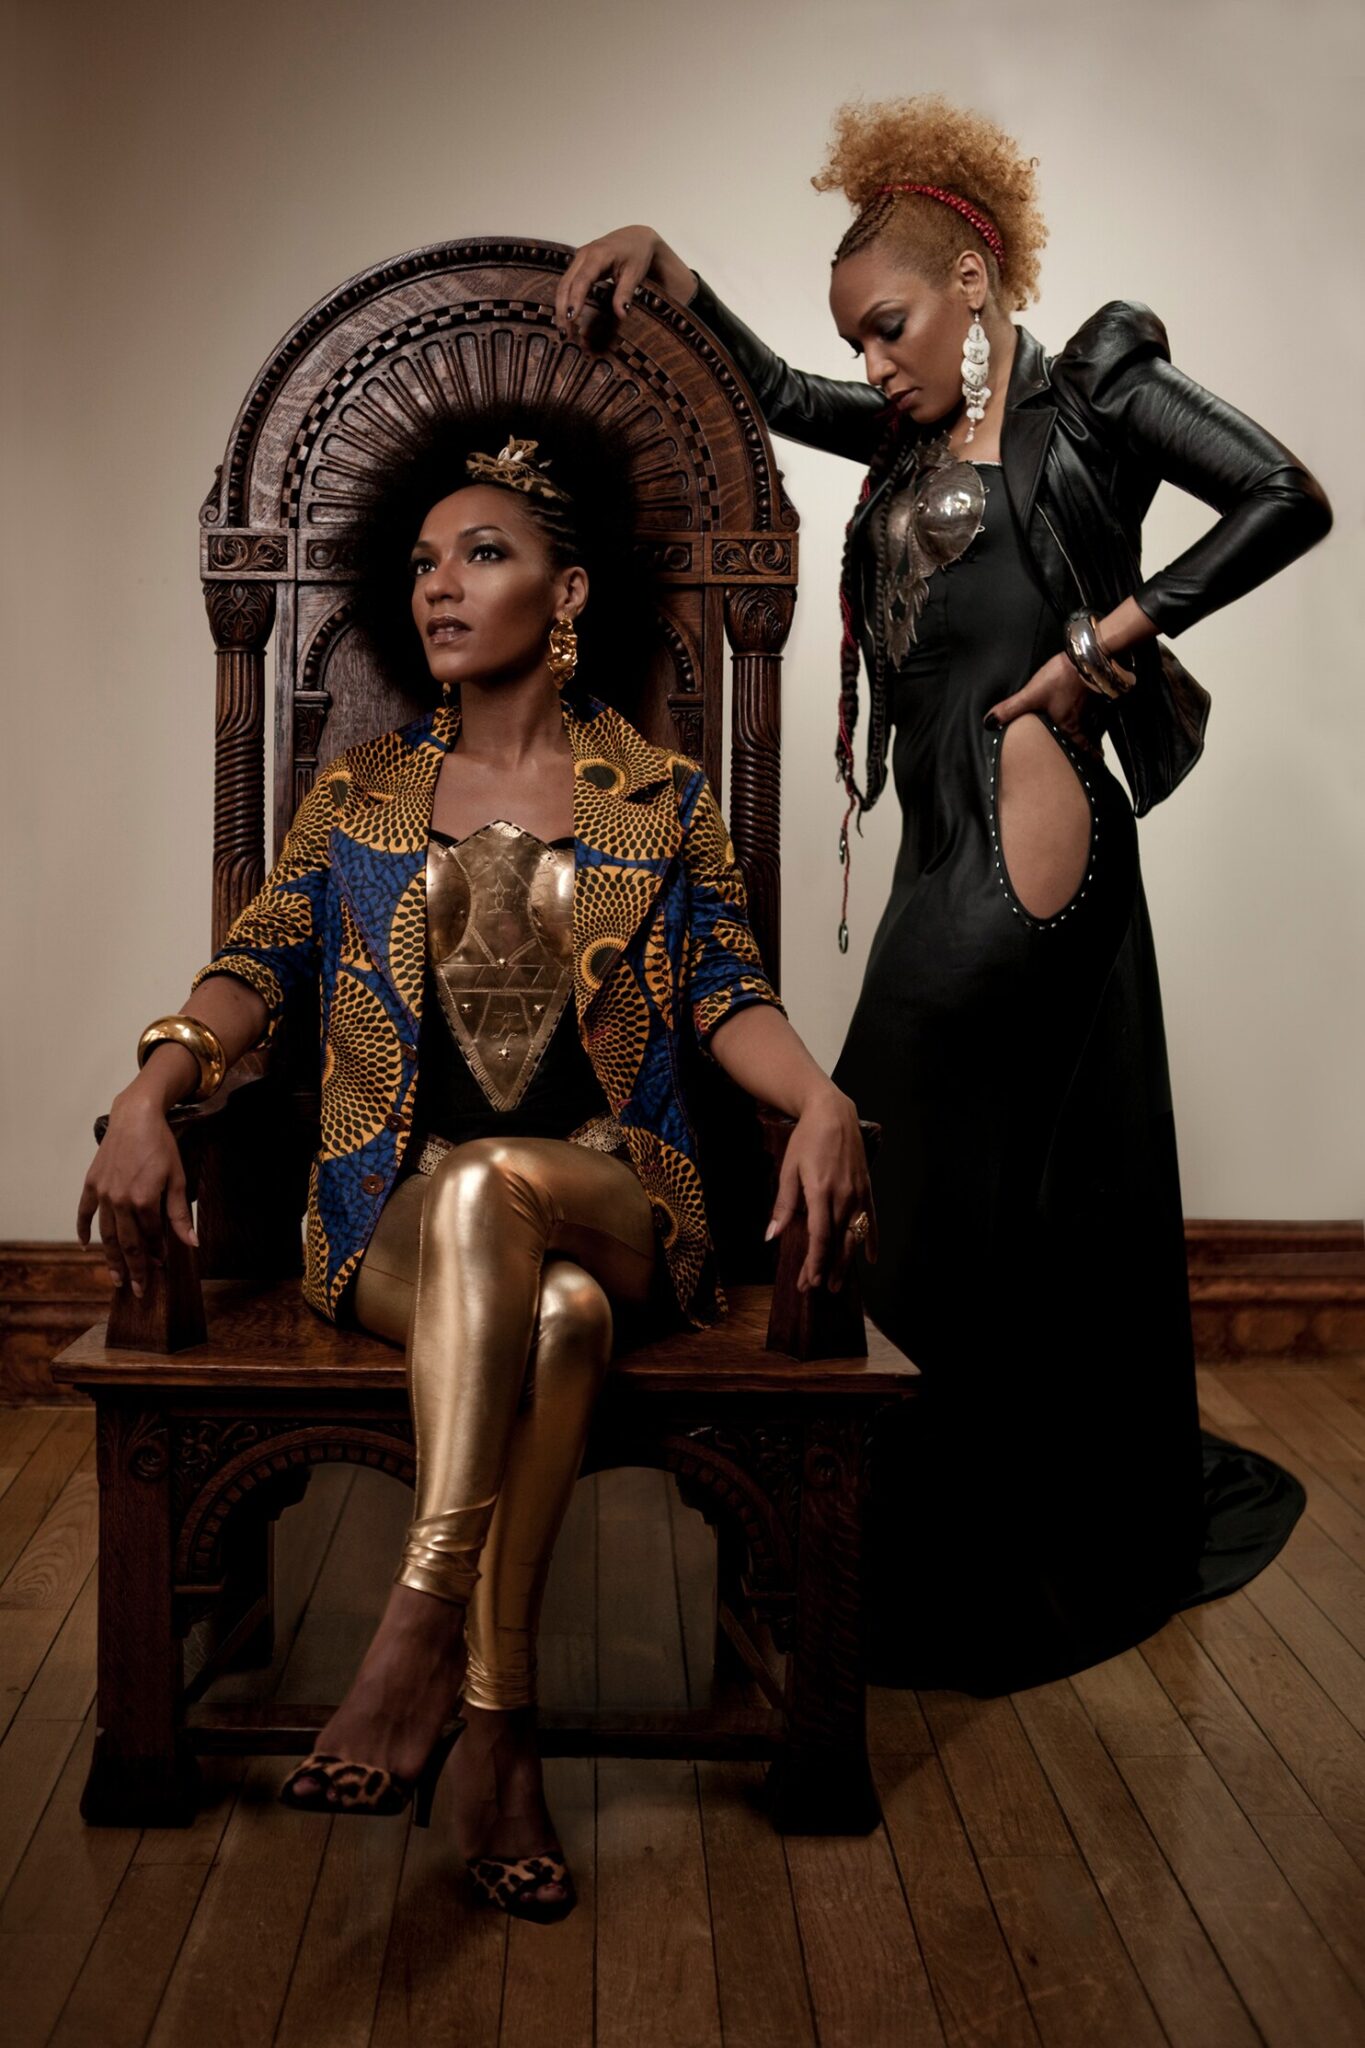 Two women exuding confidence and regality, with one sitting on a throne-like chair and the other standing beside her, both dressed in outfits with african-inspired elements and bold accessories.